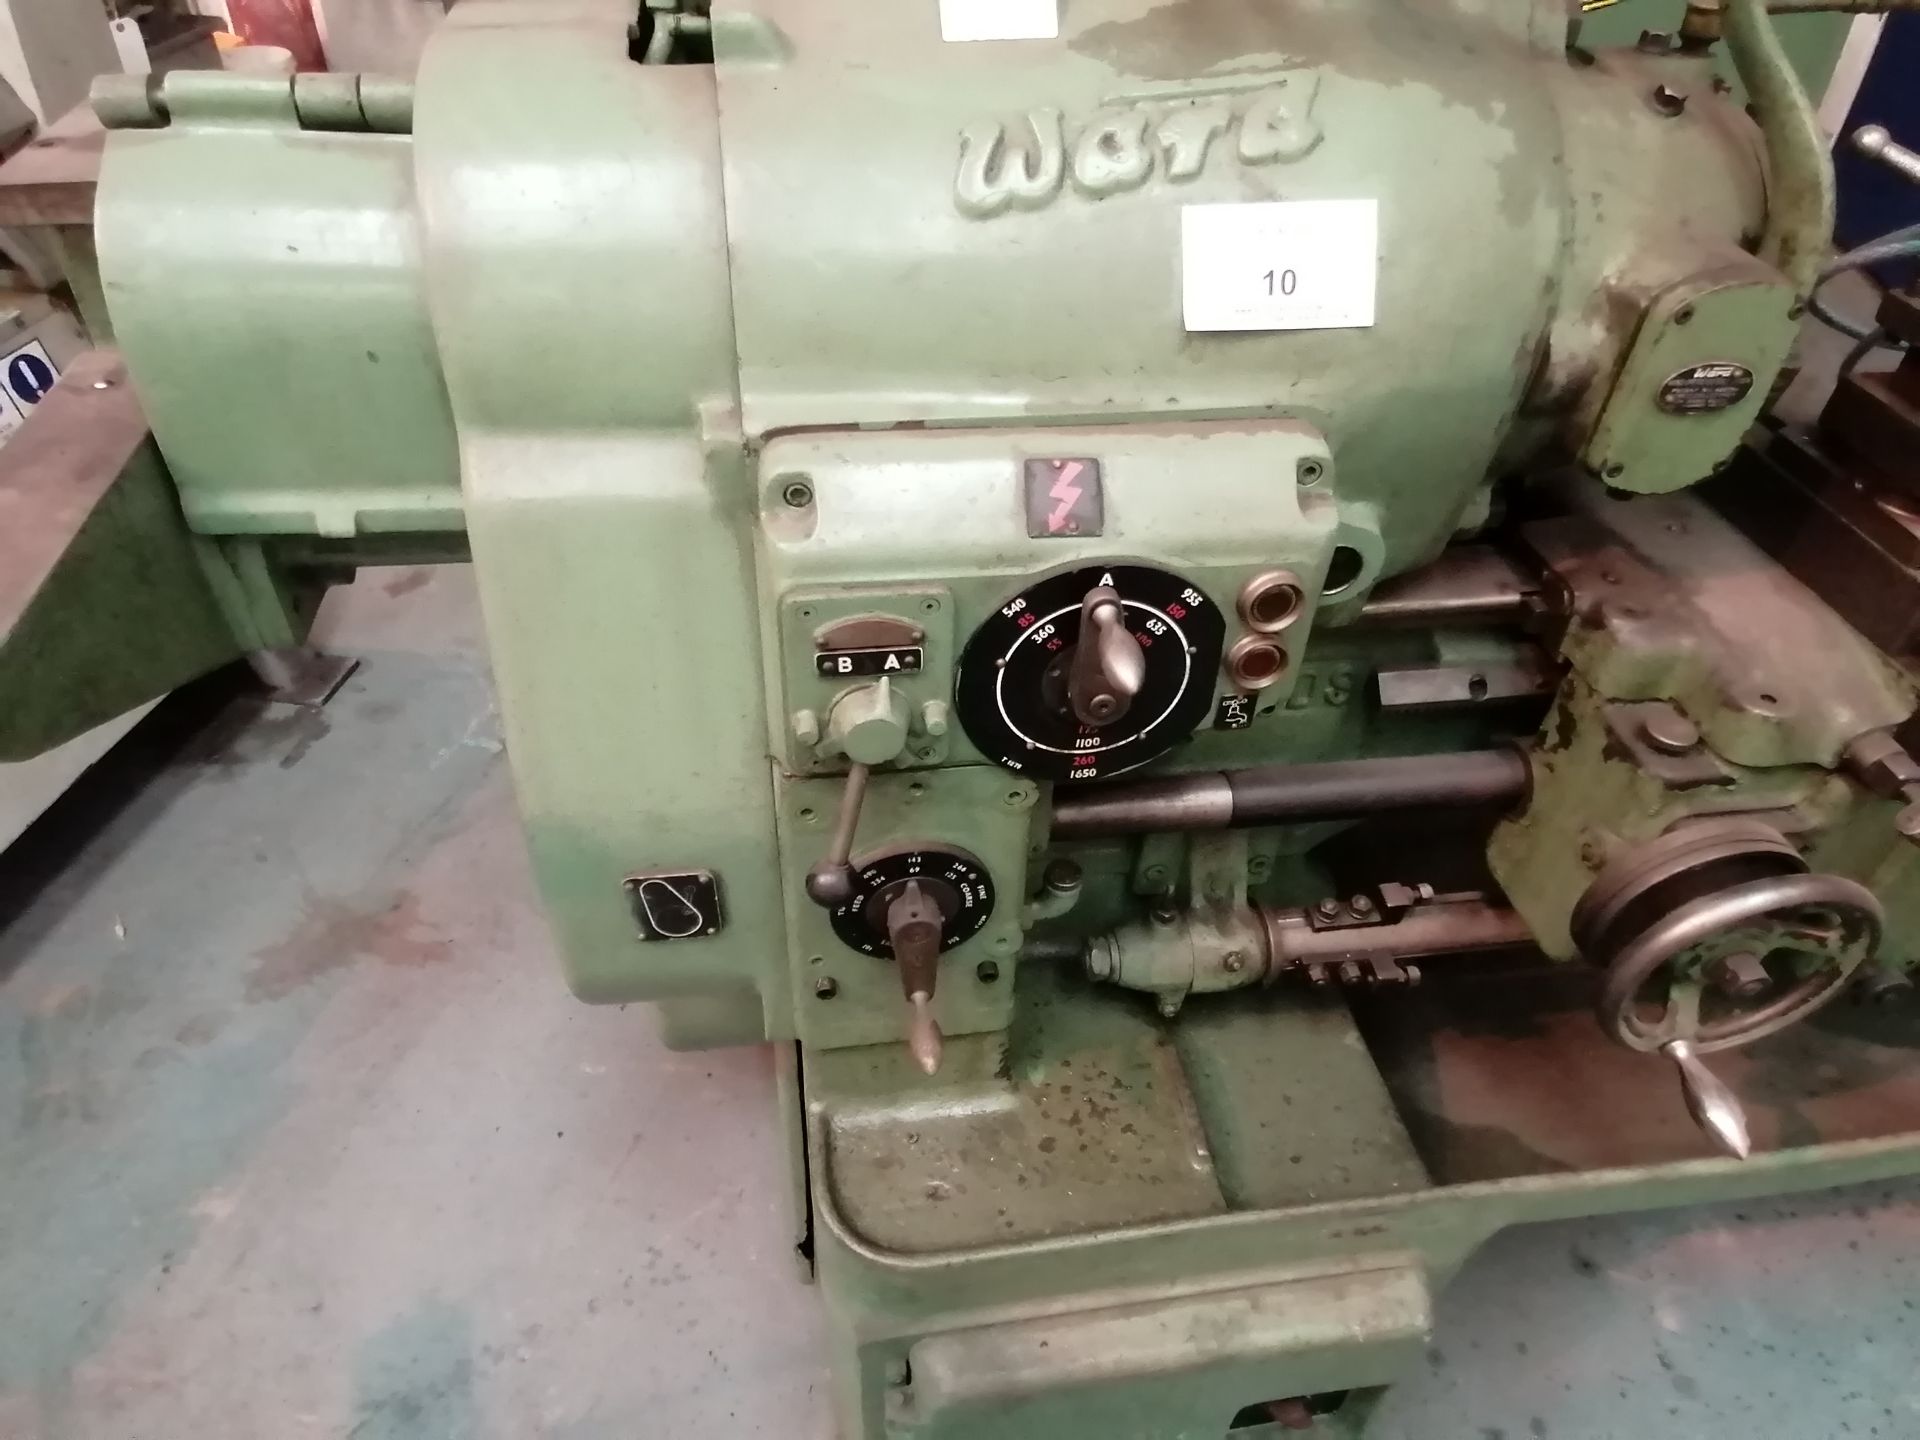 Ward 3DS Capstan Lathe Serial No 0180 - Image 4 of 5